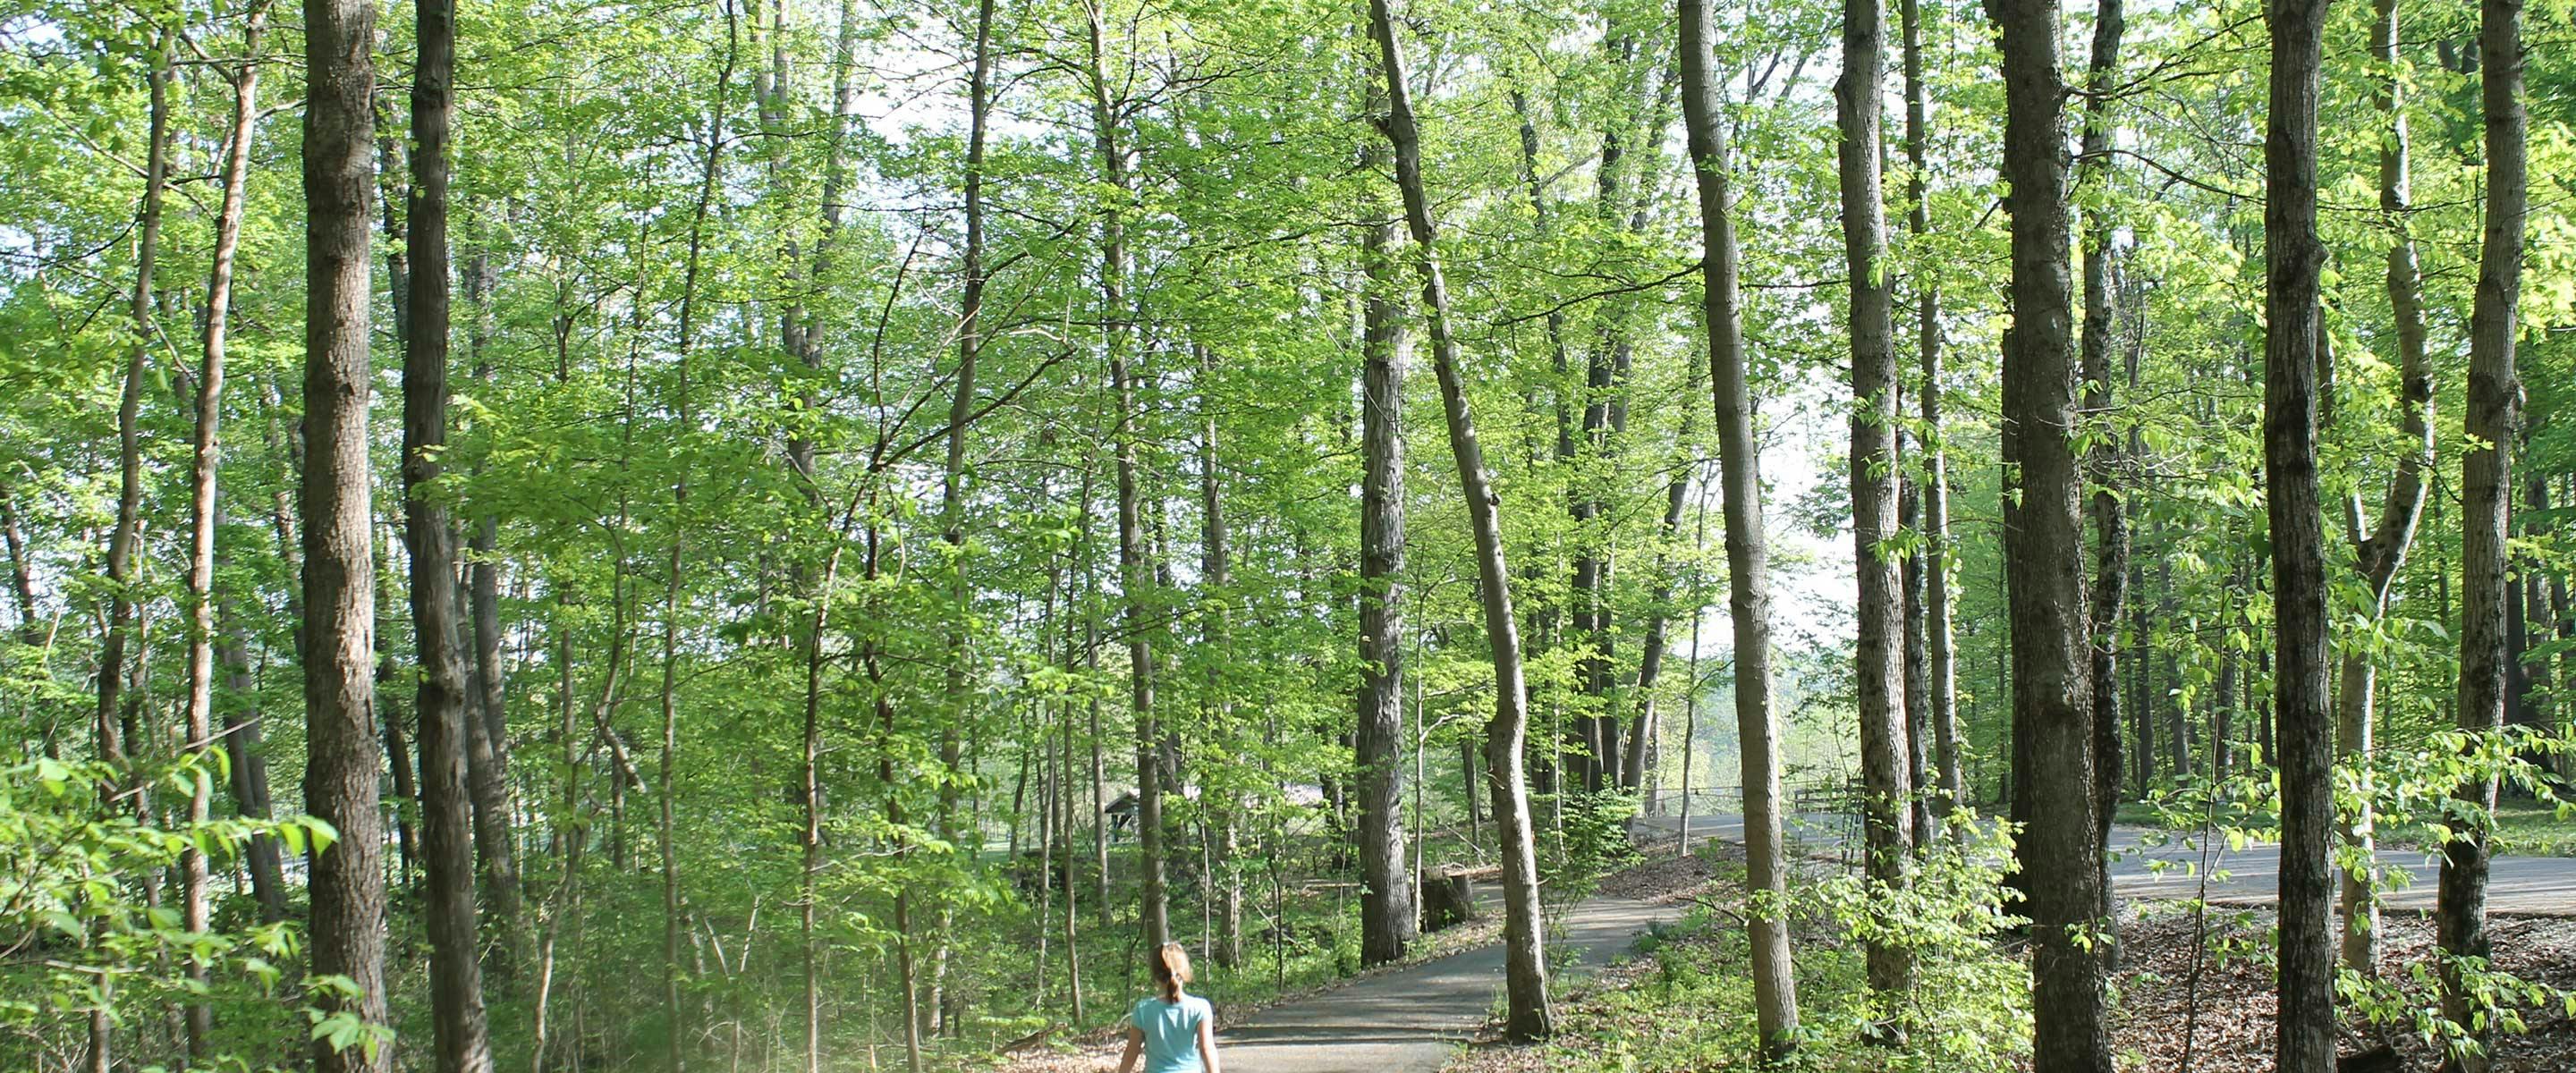 girl walking on paved nature trail to tree forrest canopy area in shade